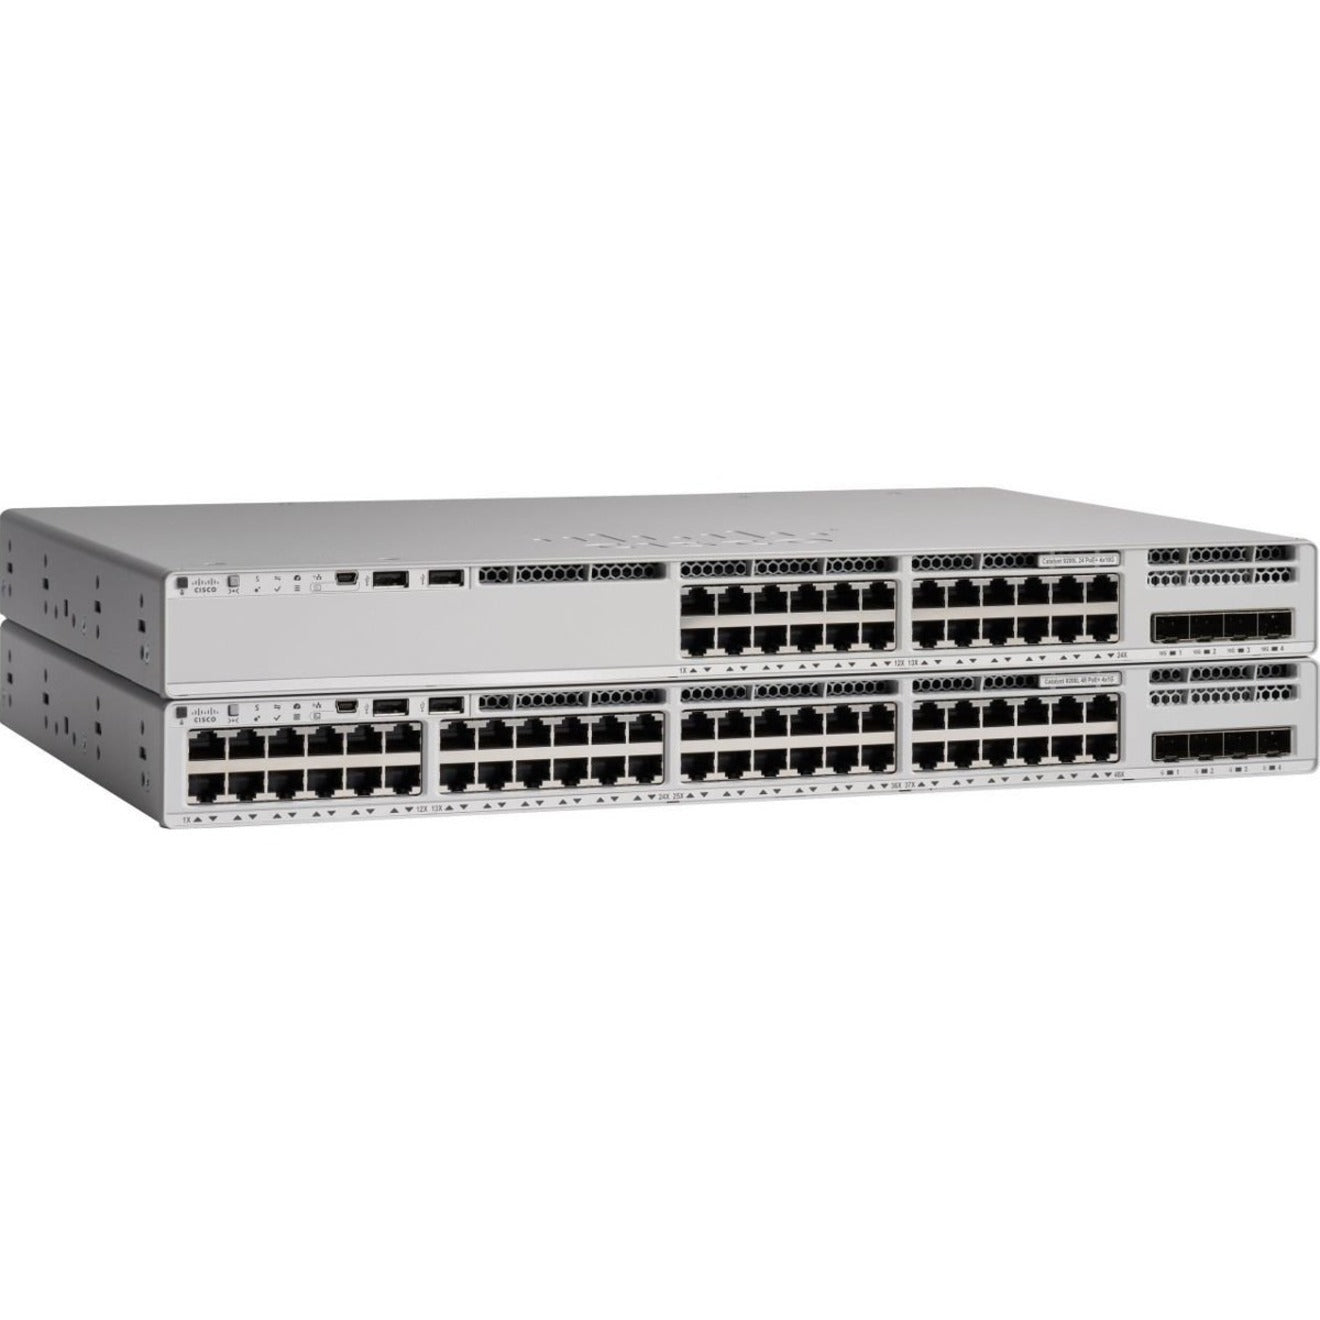 Cisco C9200-48T-E Catalyst Layer 3 Switch, 48 x Gigabit Ethernet Network, Power Supply, Manageable